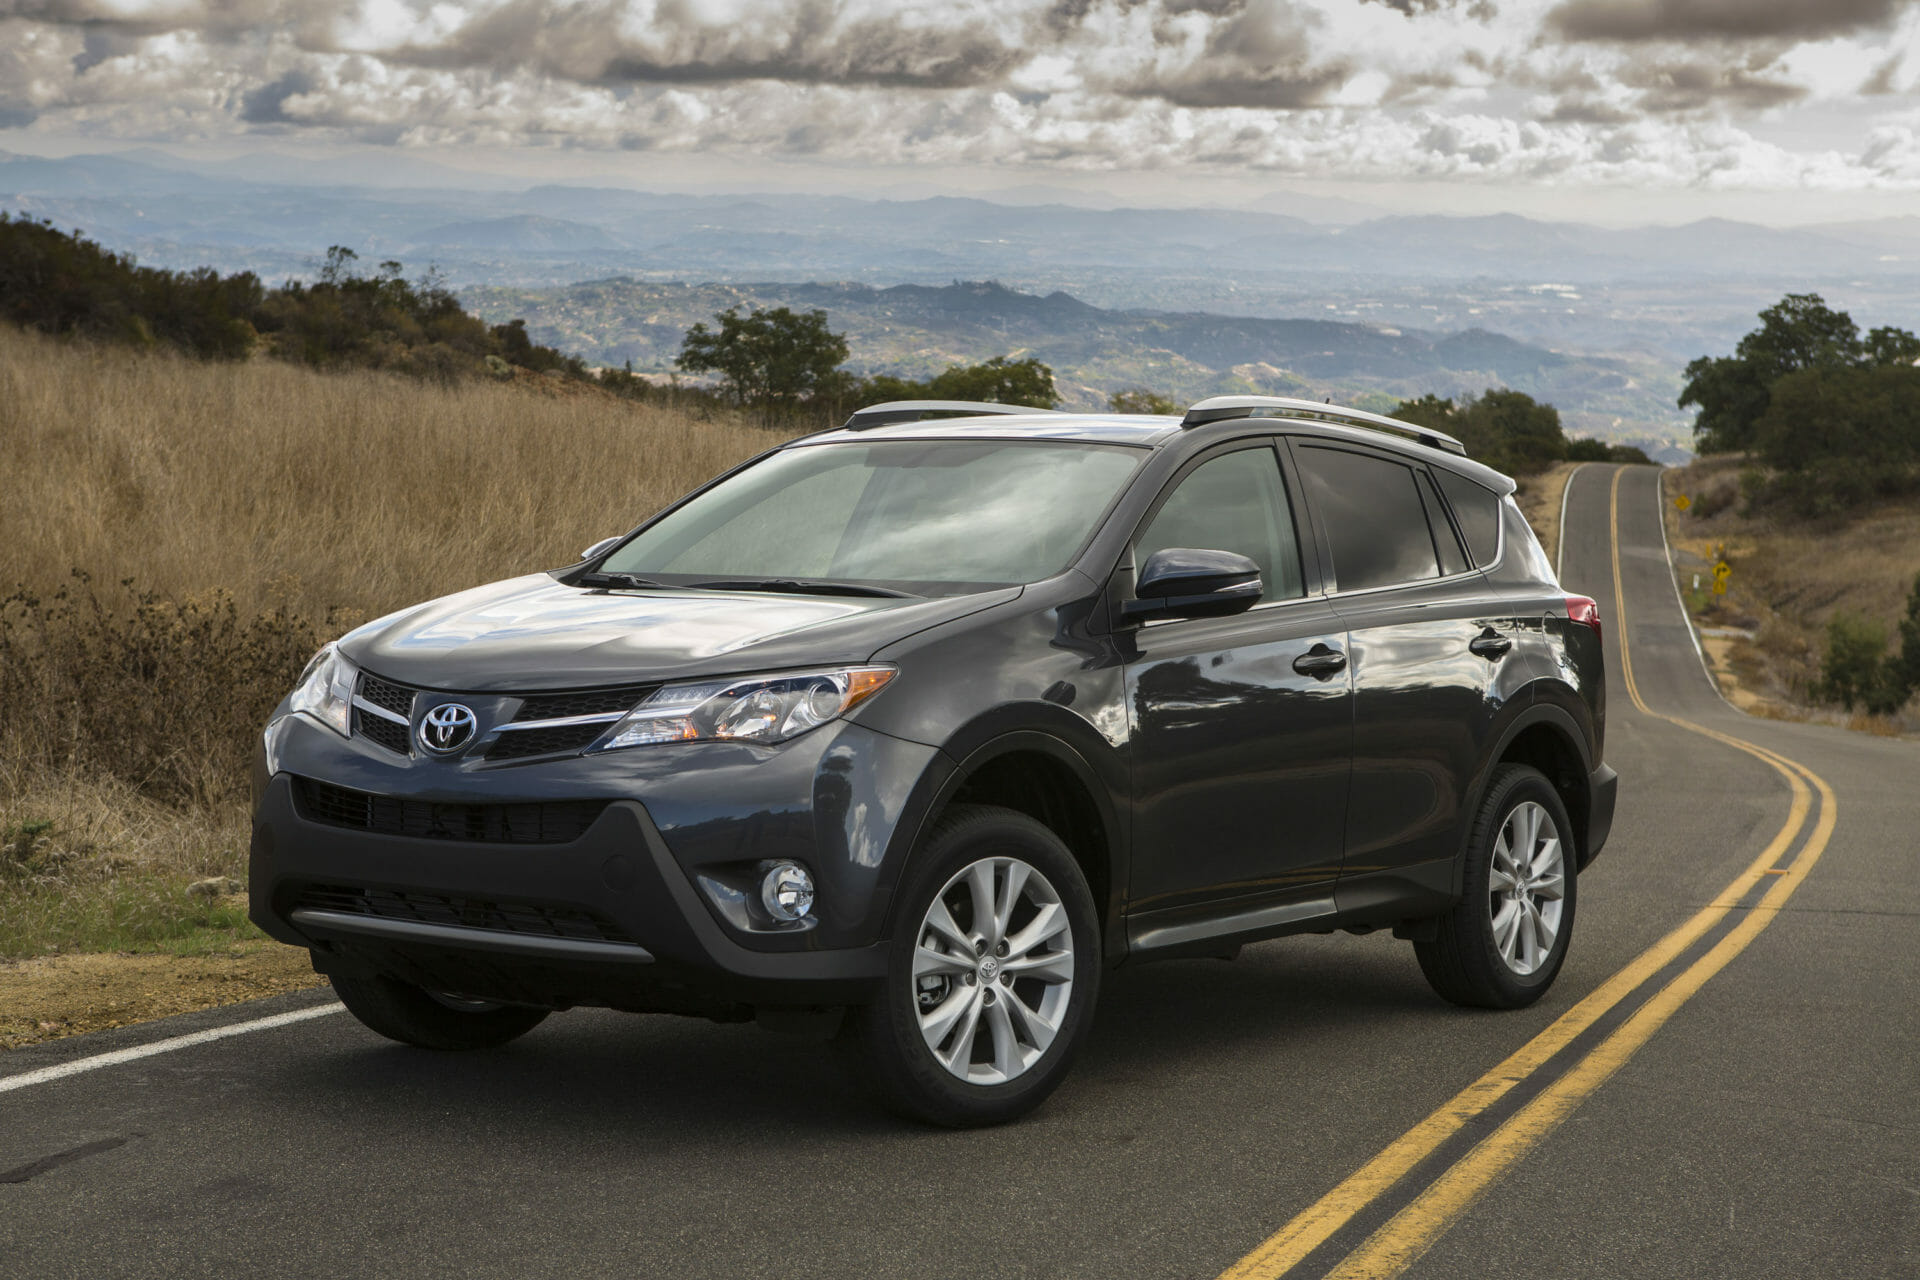 2015 Toyota RAV4 Review: A Long-Lasting and Safe Compact SUV